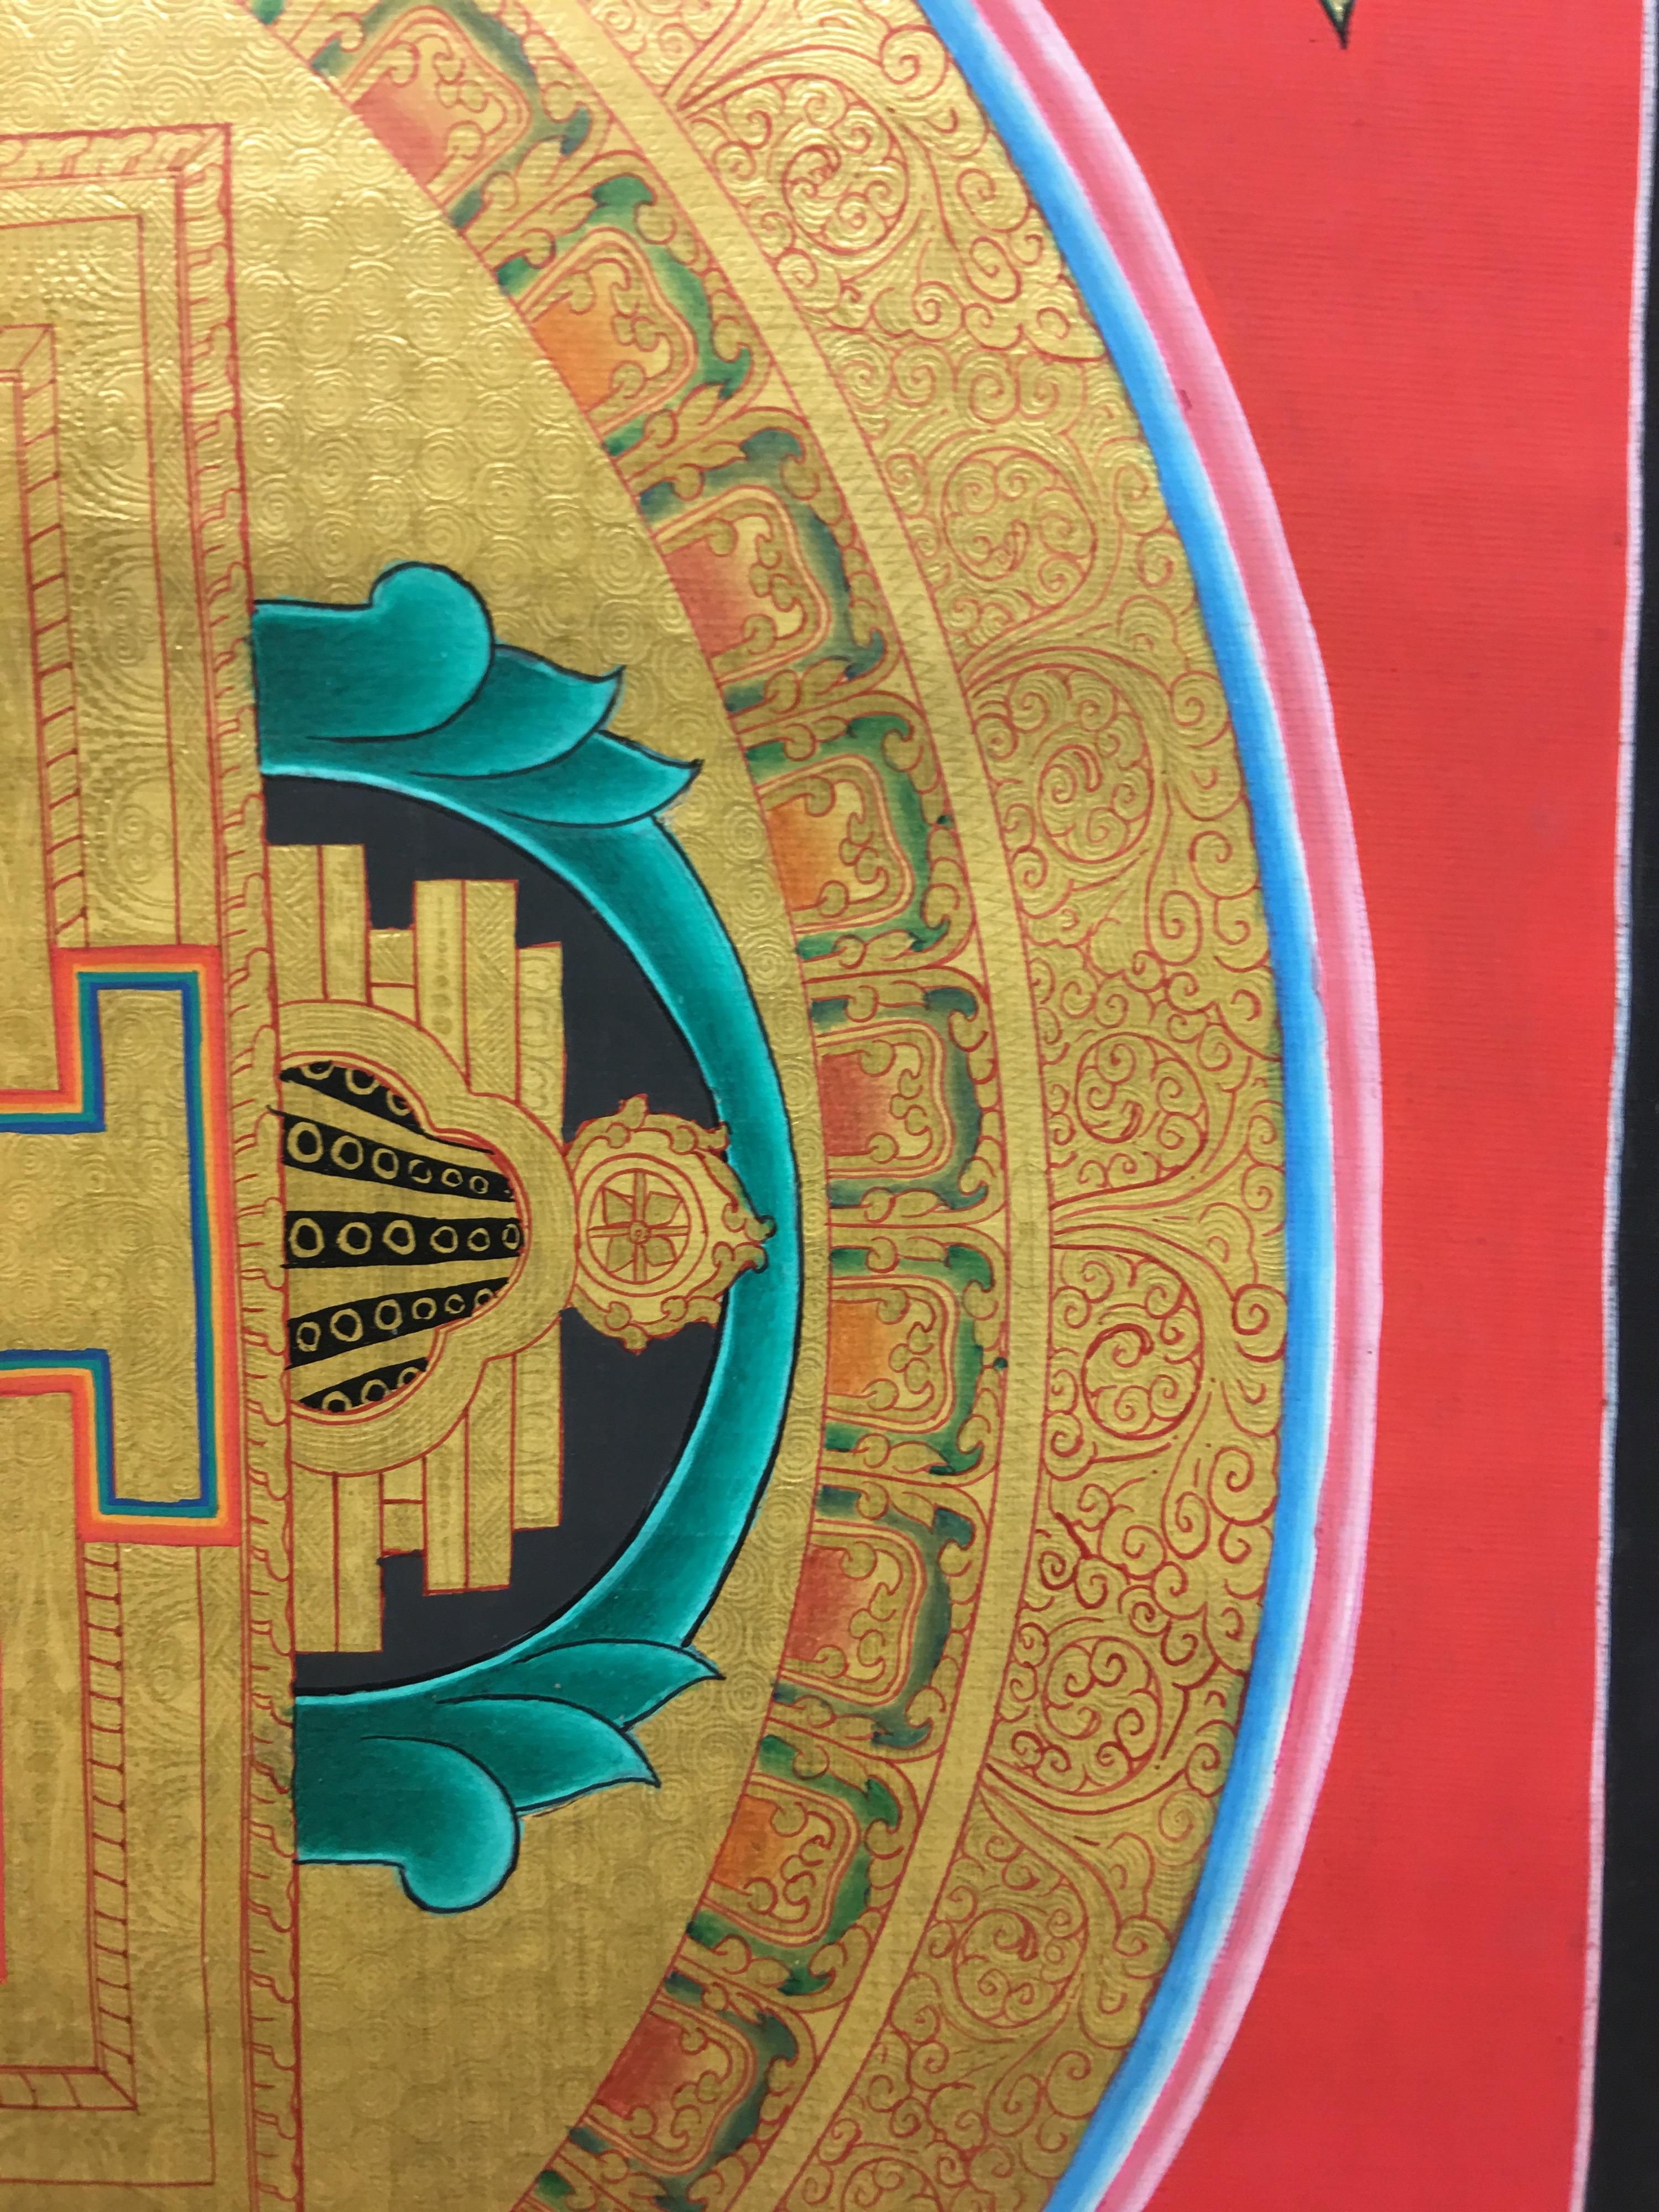 Gold Bajra Mandala Thangka is one of a kind 100% hand painted on canvas with center figurine of Green tara which is symbol of Posetive